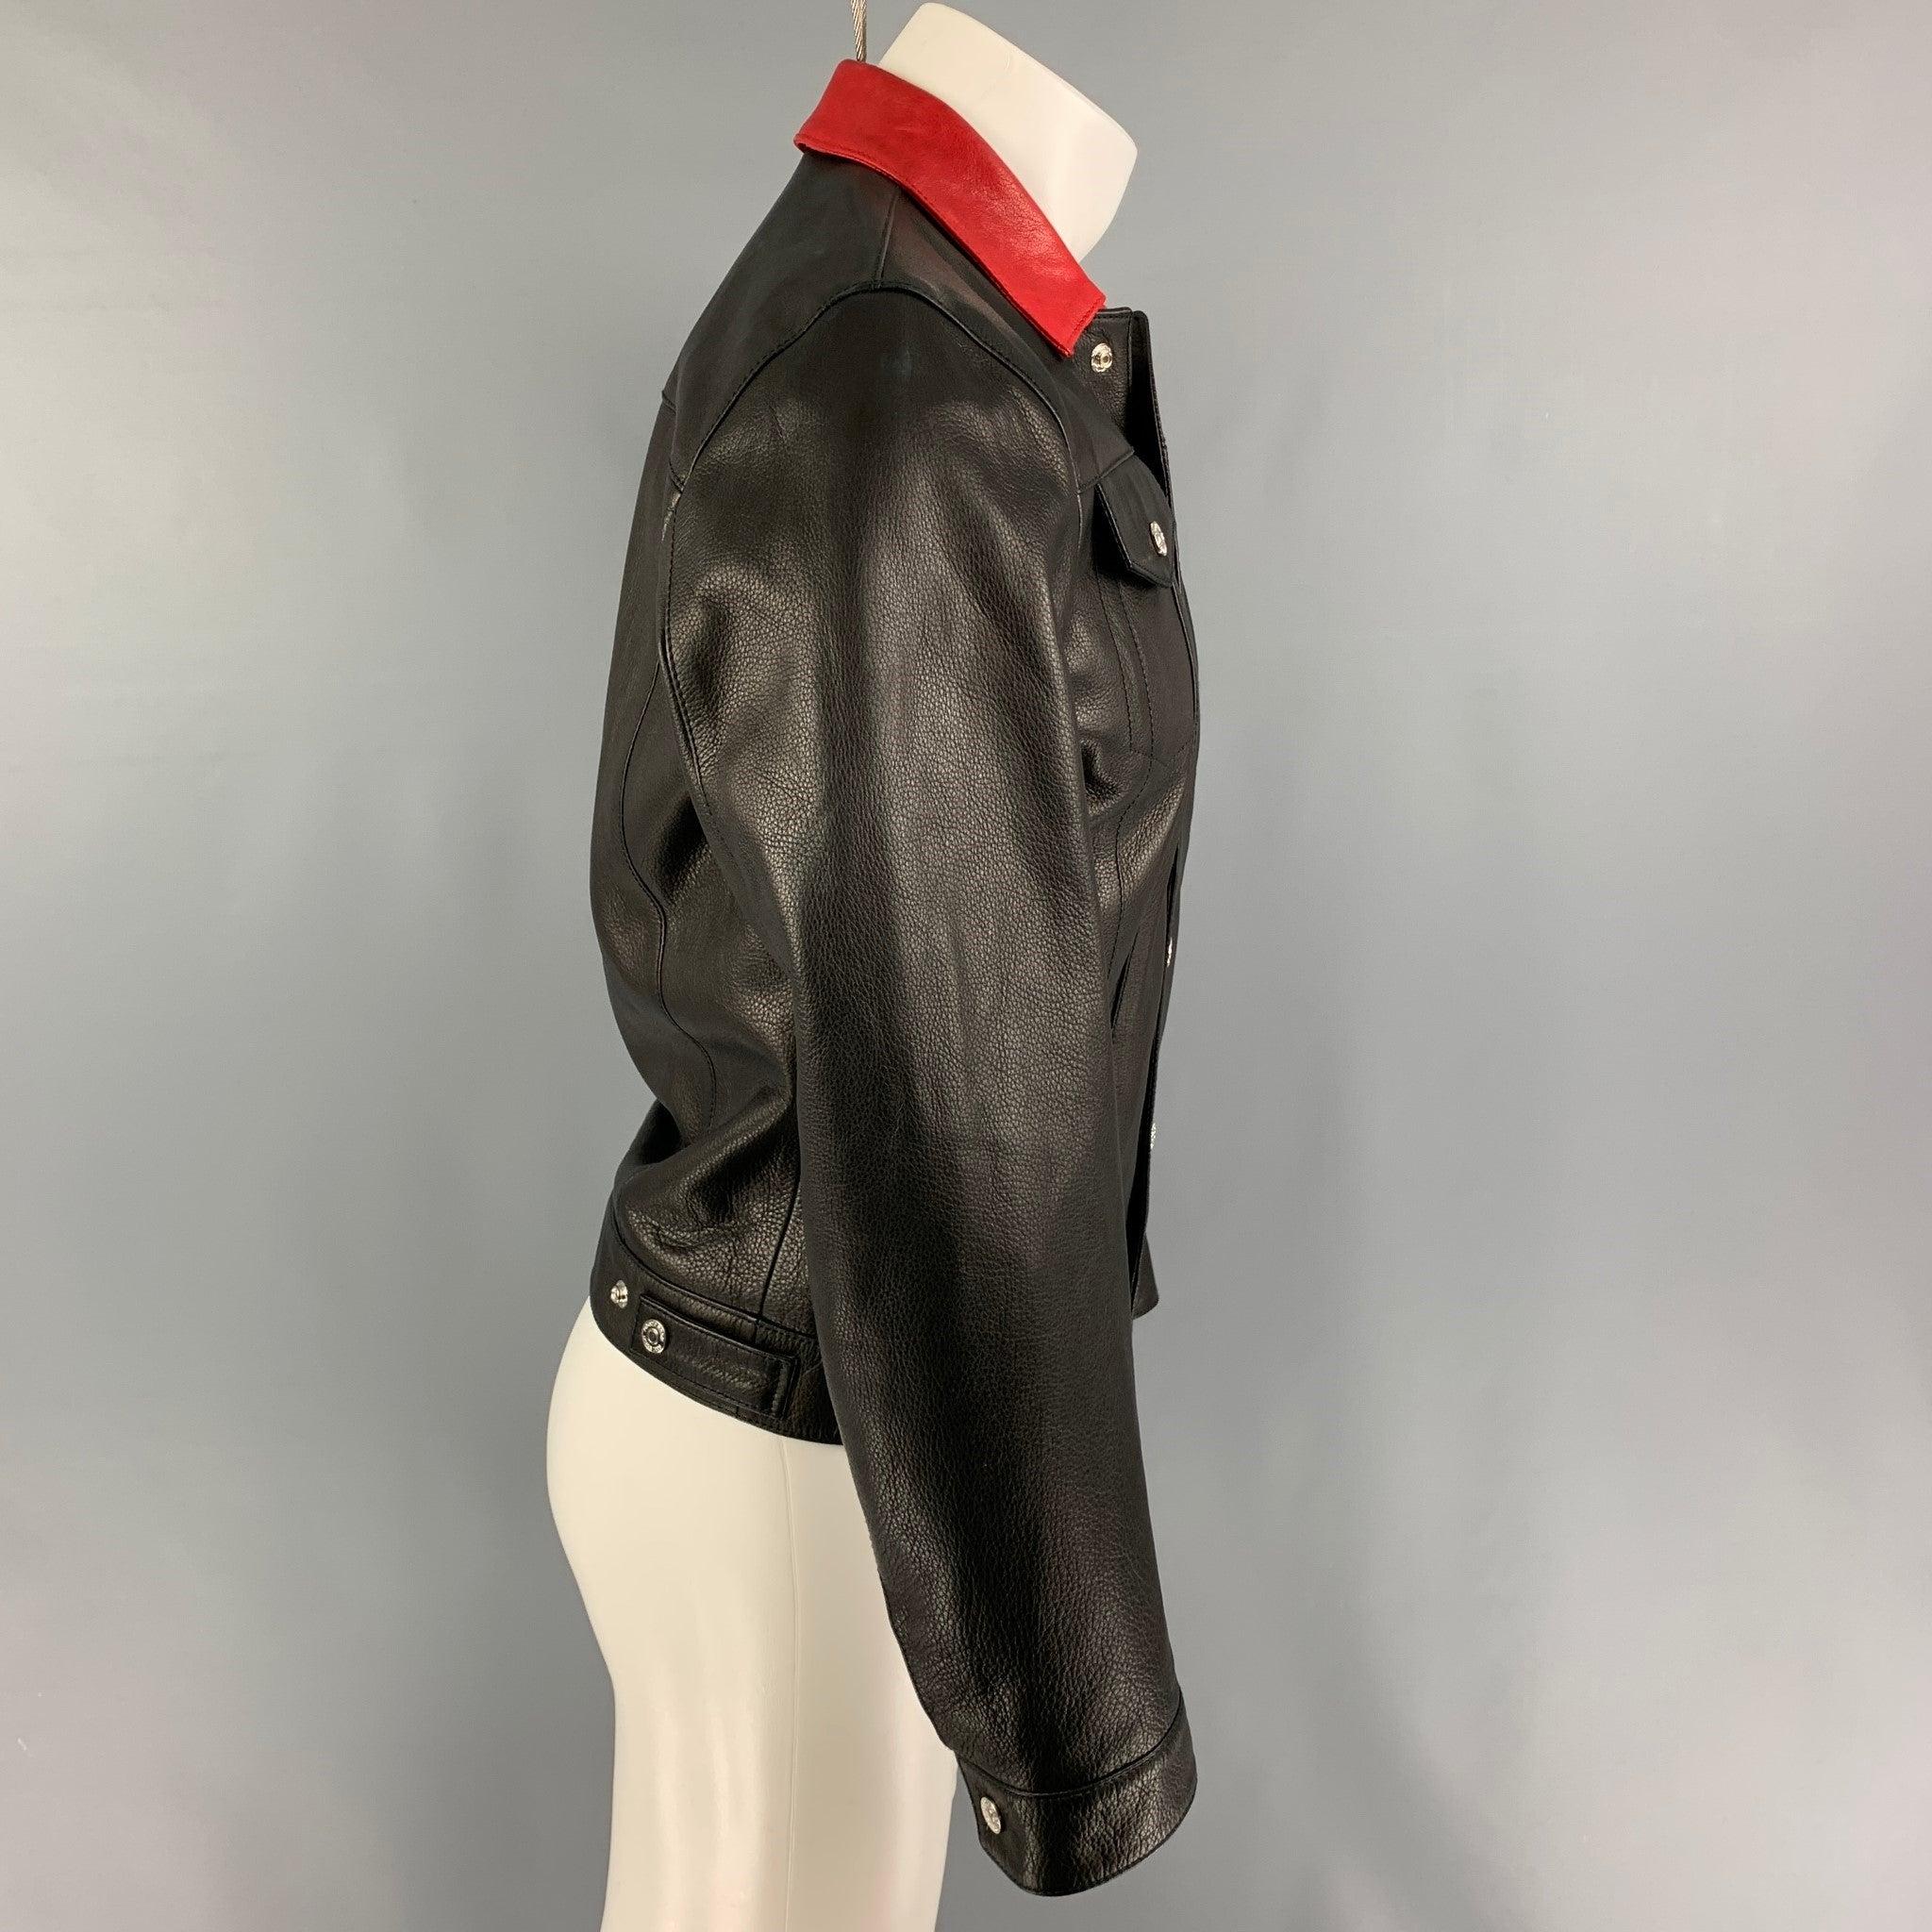 DSQUARED2 jacket comes in a black leather with a full liner featuring a trucker style, red collar, front pockets, and a snap button closure. Made in Italy.
Good
Pre-Owned Condition. Moderate discoloration at back. 

Marked:   46 

Measurements: 
